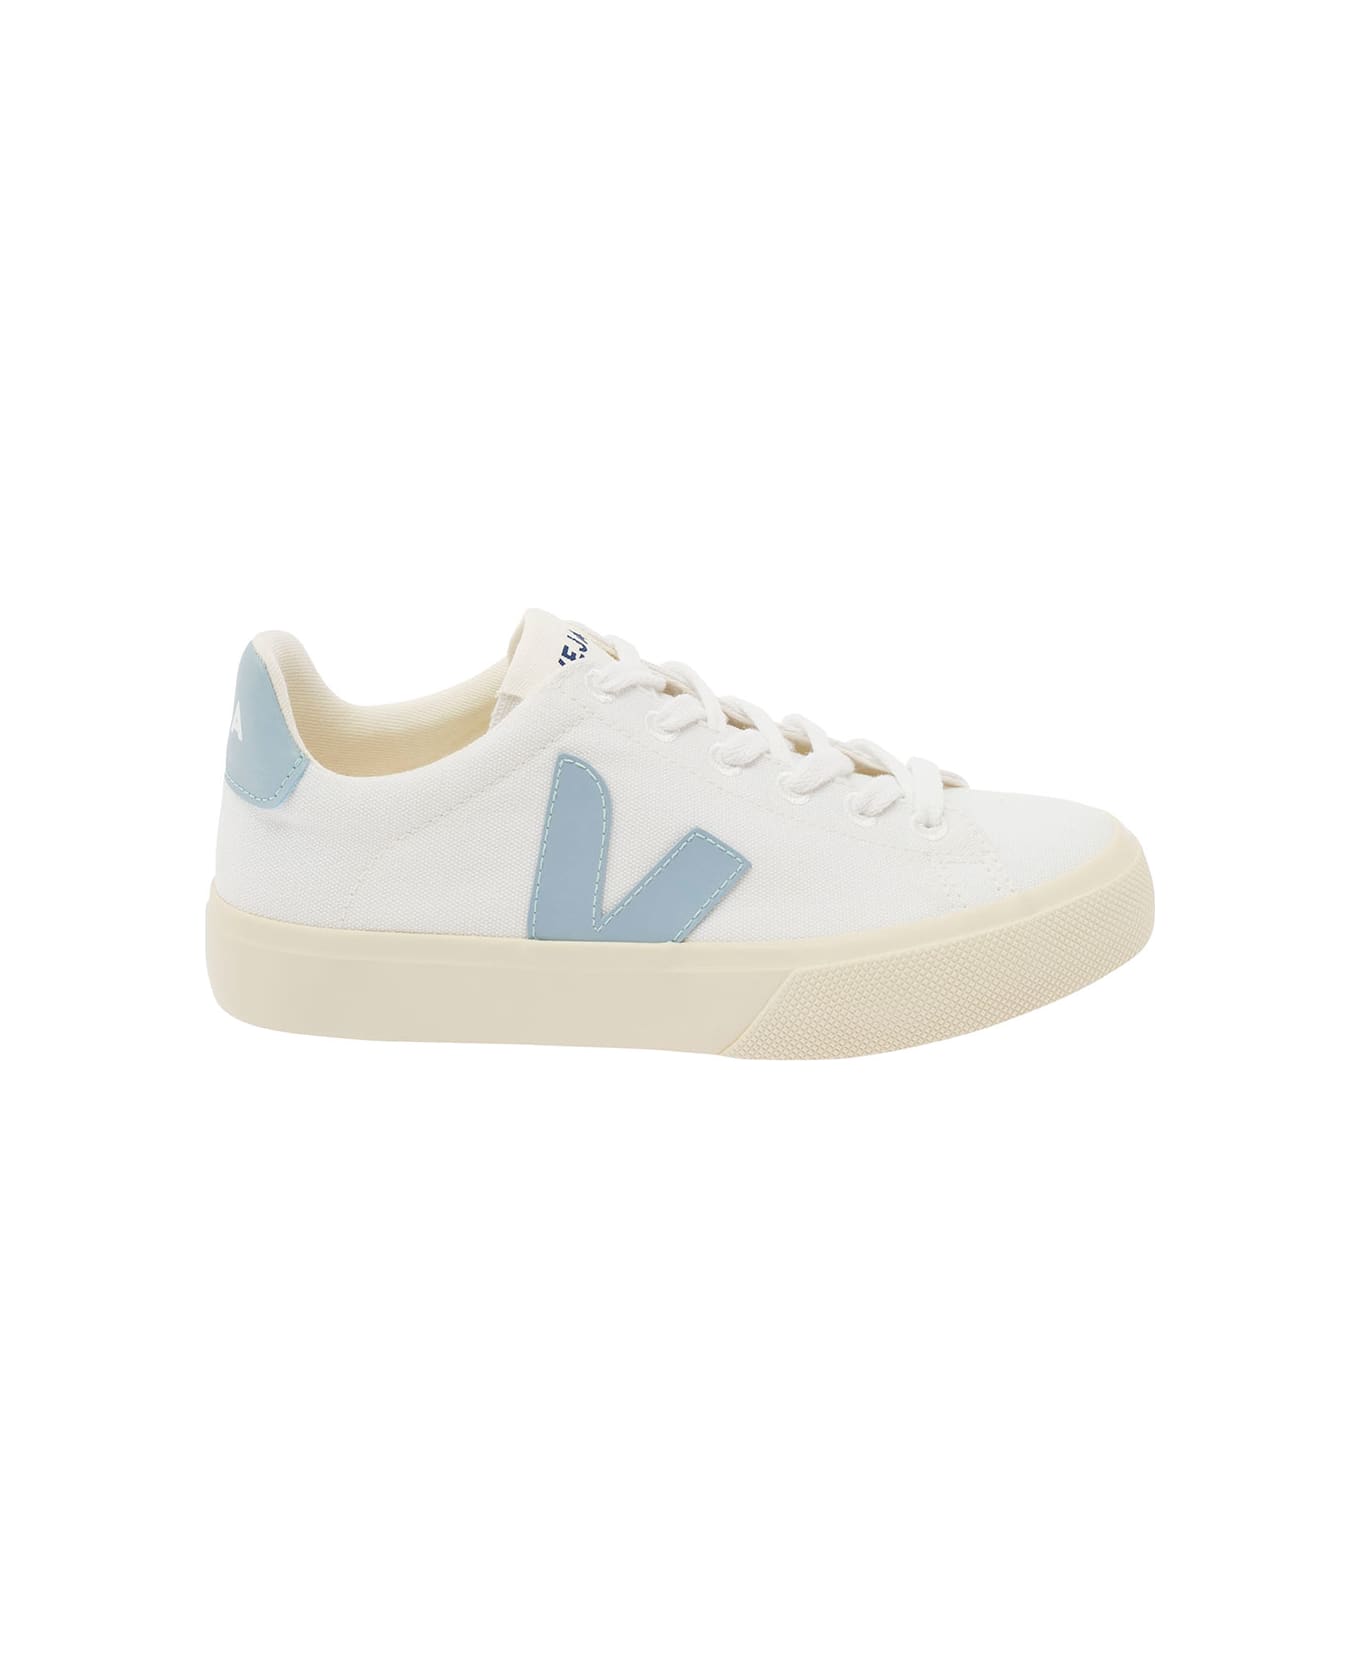 Veja White And Light Blue Sneakers With Logo Details In Leather Woman - White スニーカー